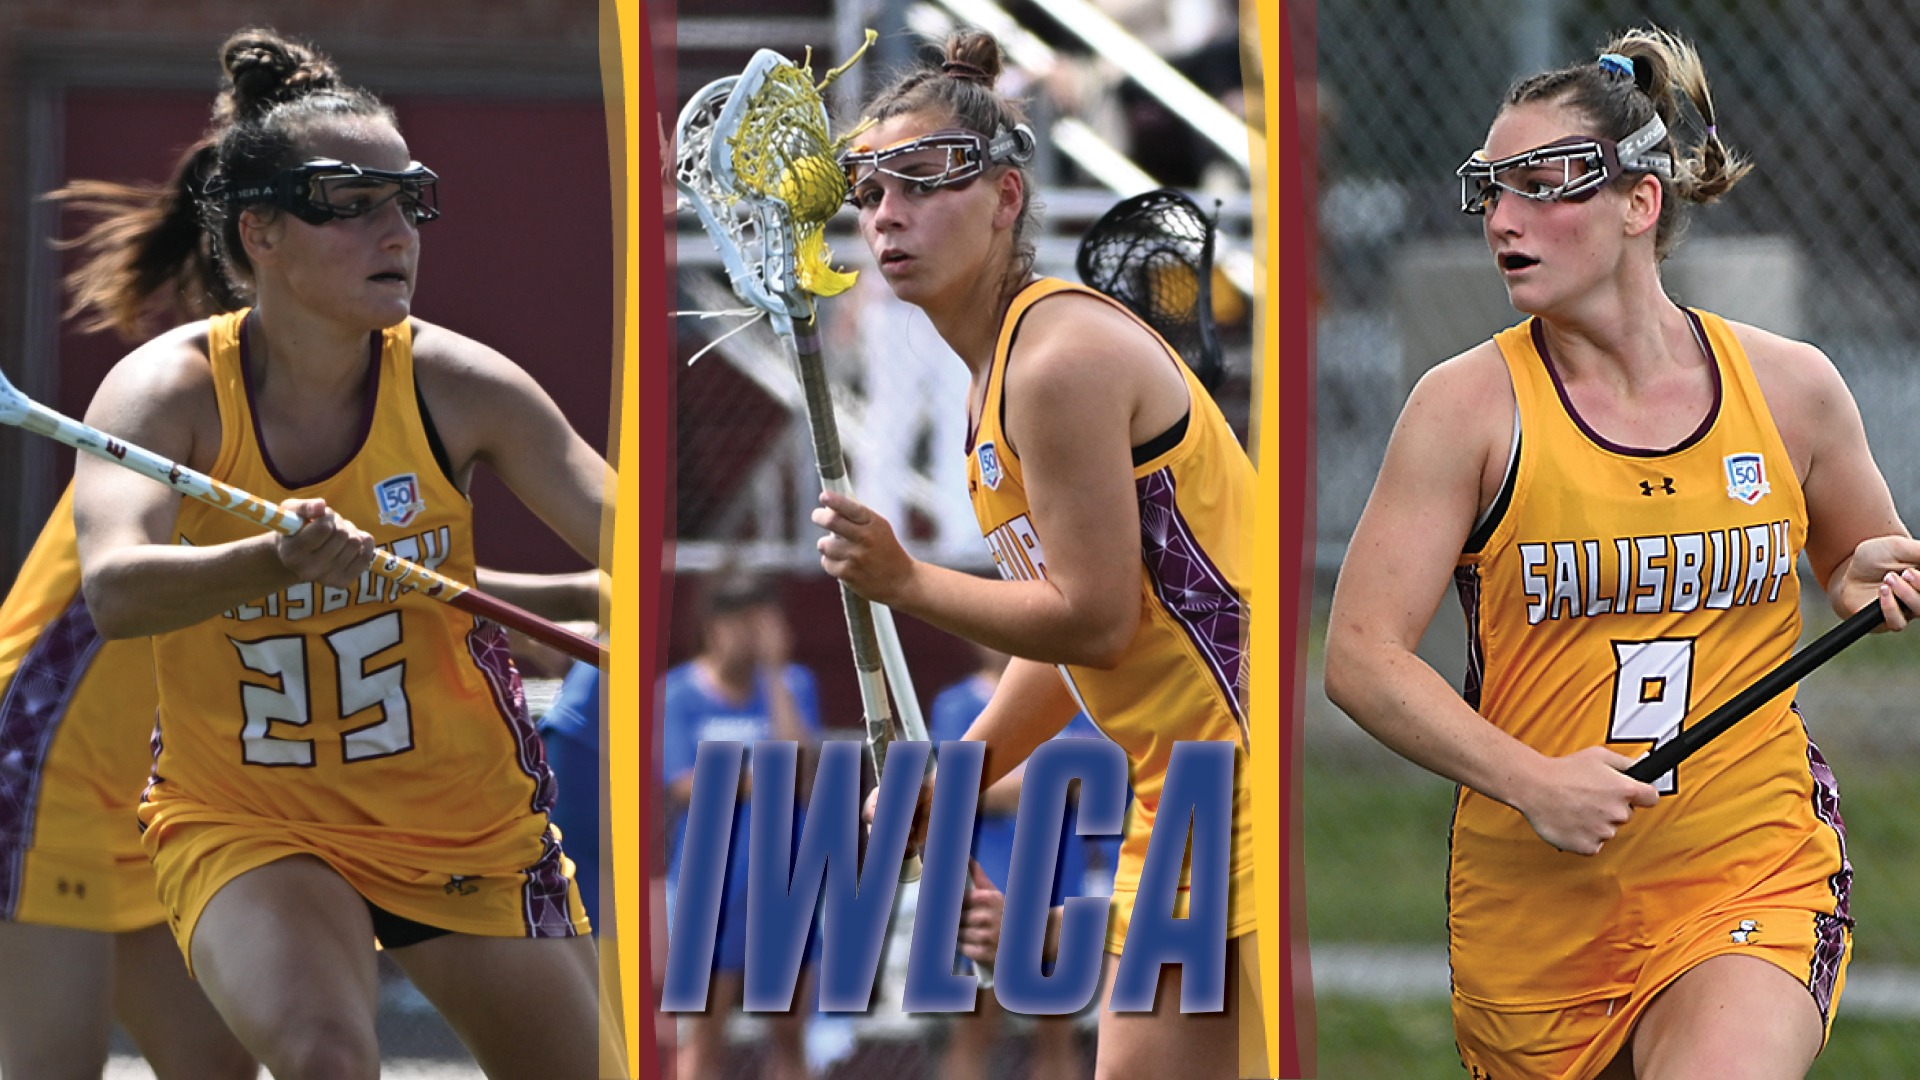 Salisbury's Hanzsche, Held, Vilov honored as IWLCA All-Americans